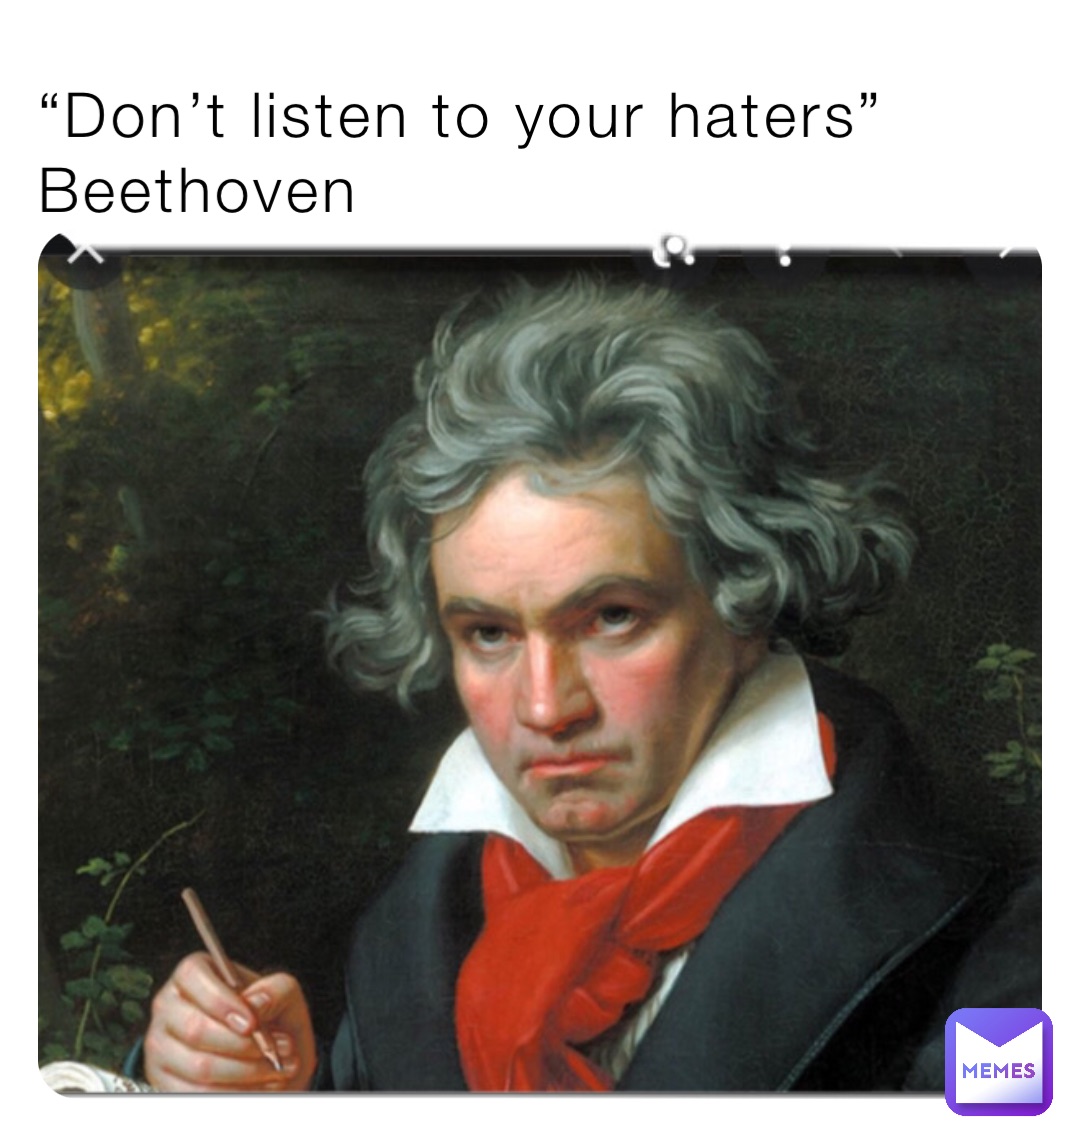 “Don’t listen to your haters” Beethoven